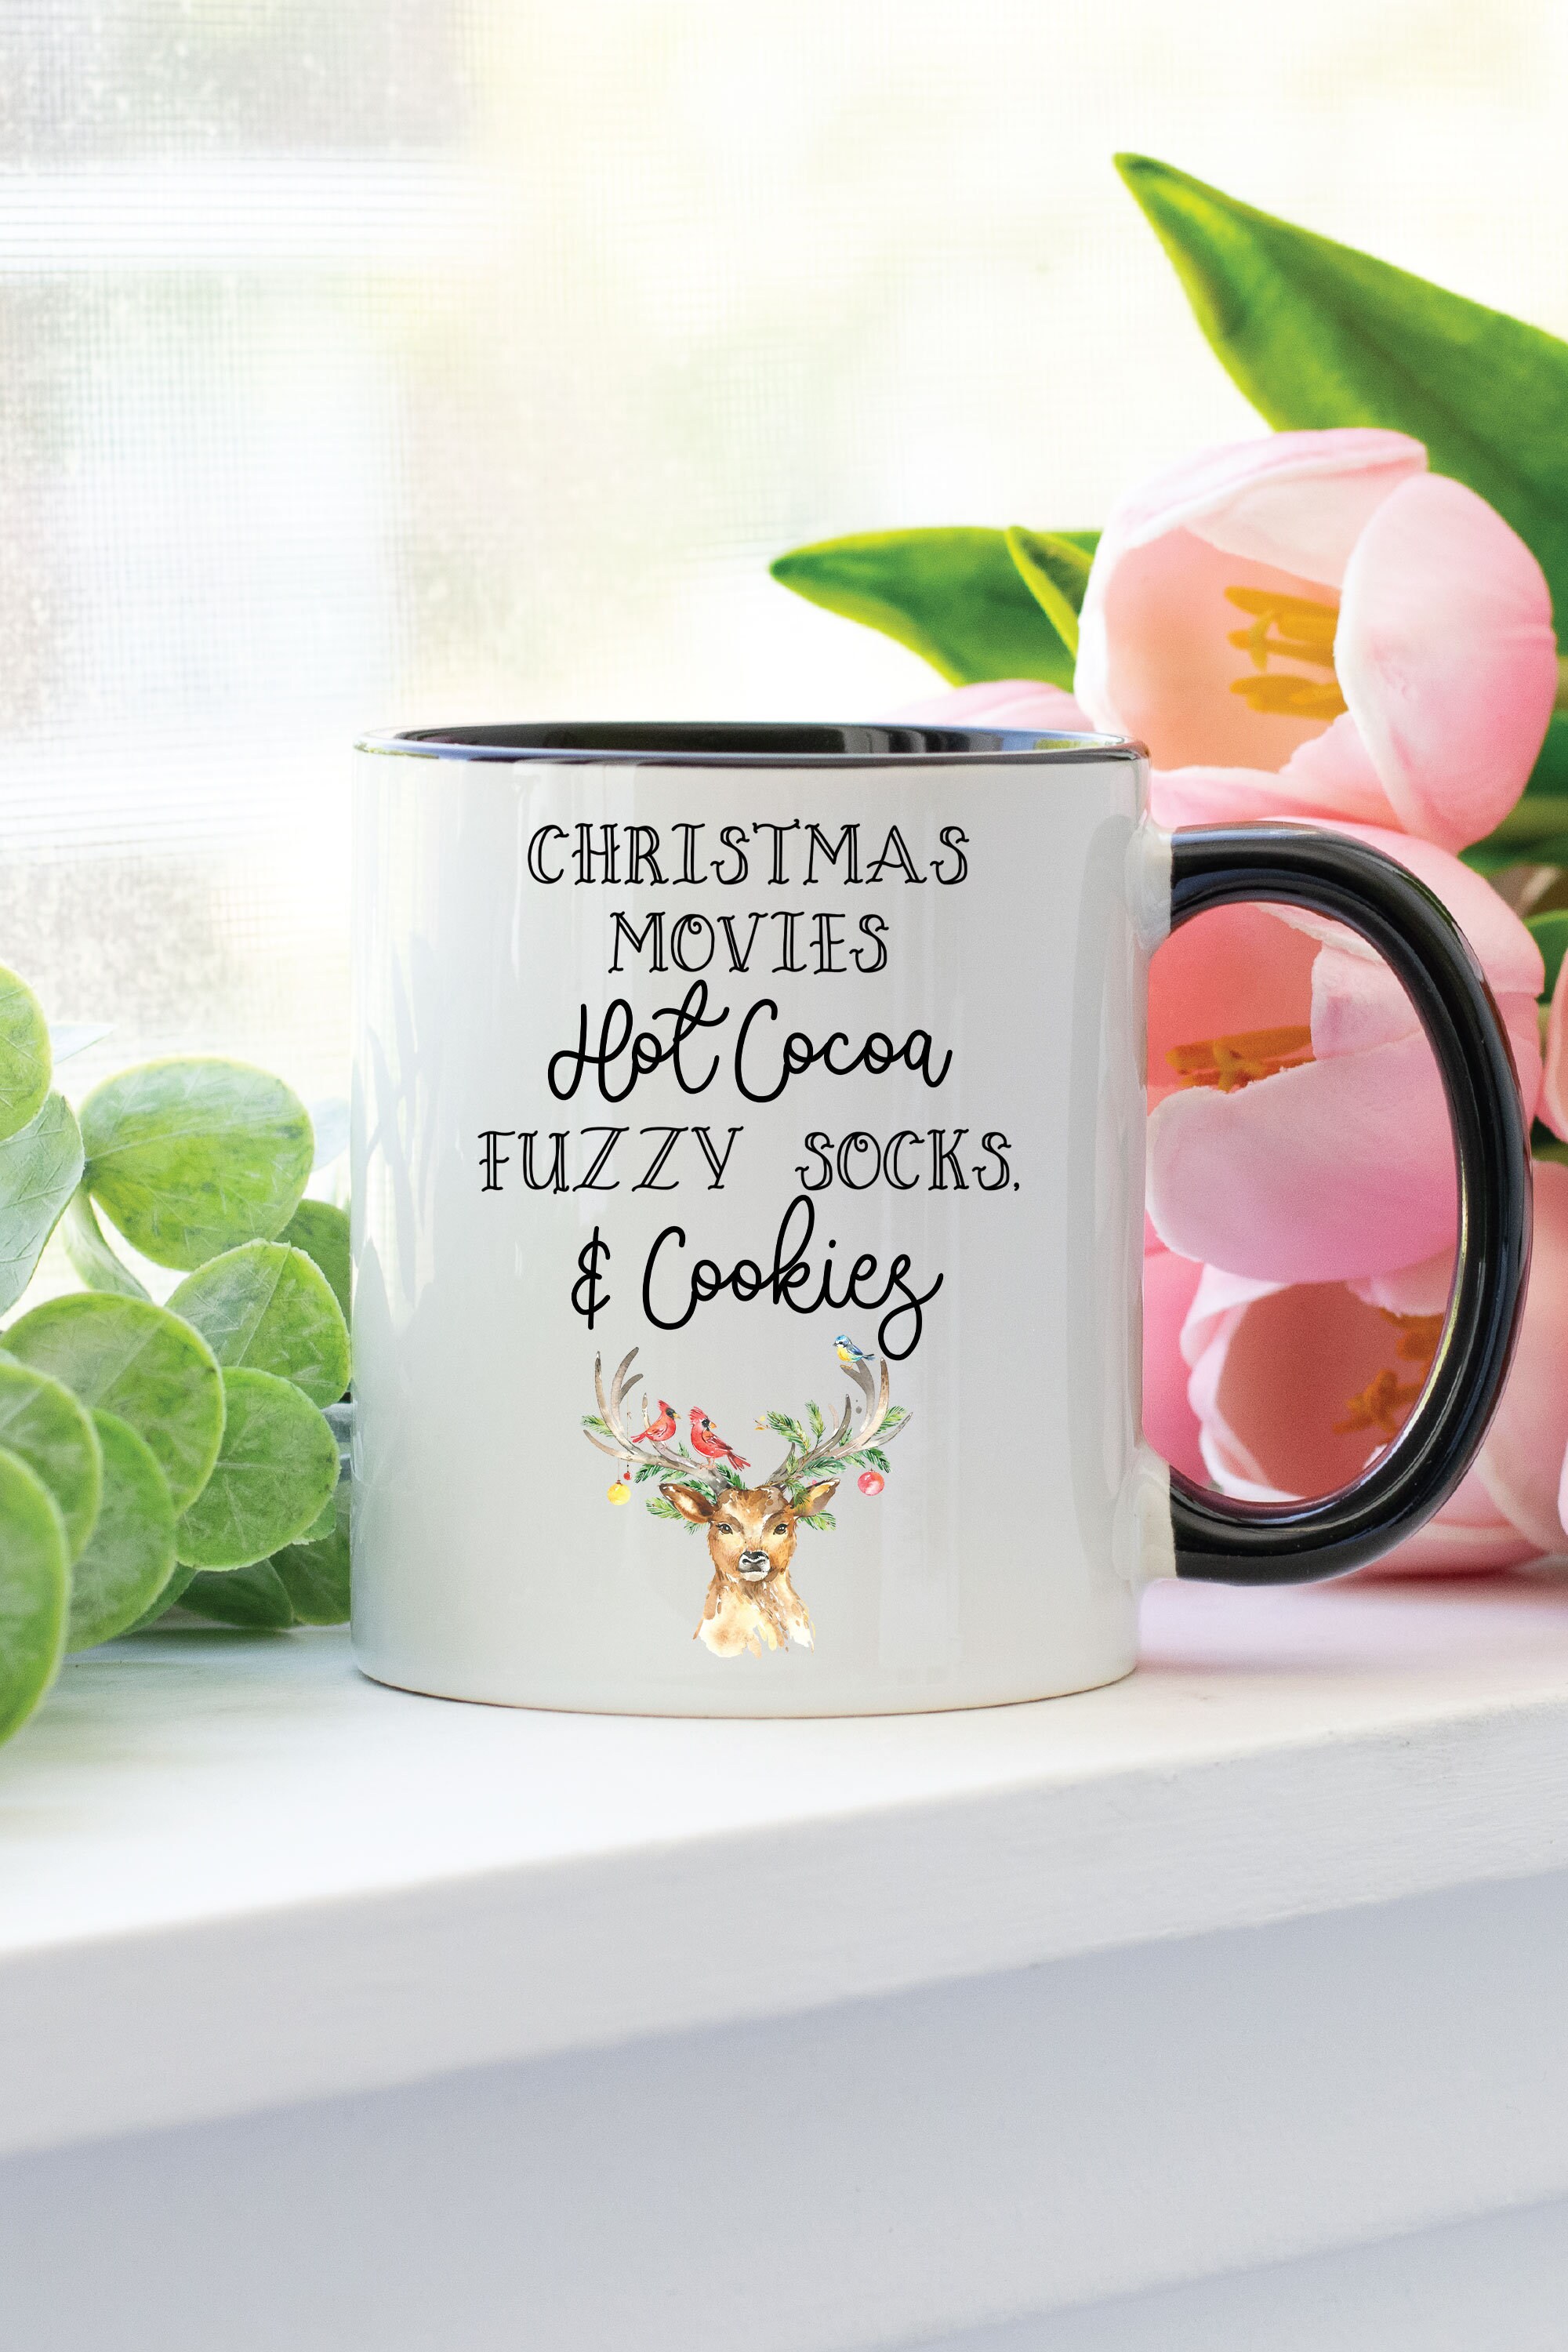 Red Speckled aluminum coffee Mug hot cocoa & fuzzy socks saying